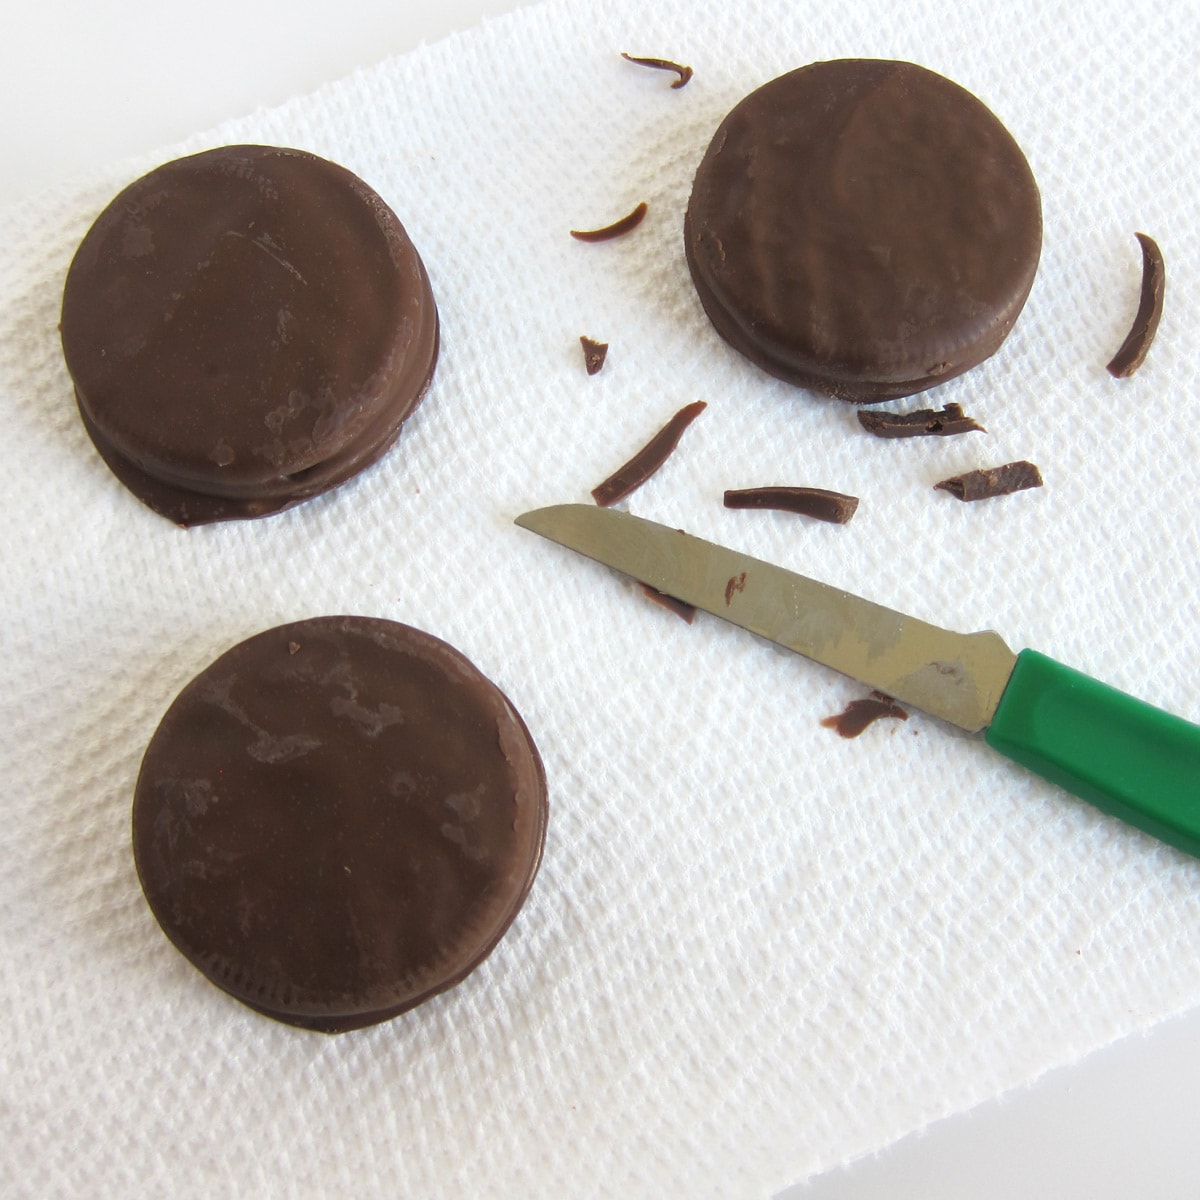 shaving the excess chocolate off the chocolate fudge covered OREOs. 